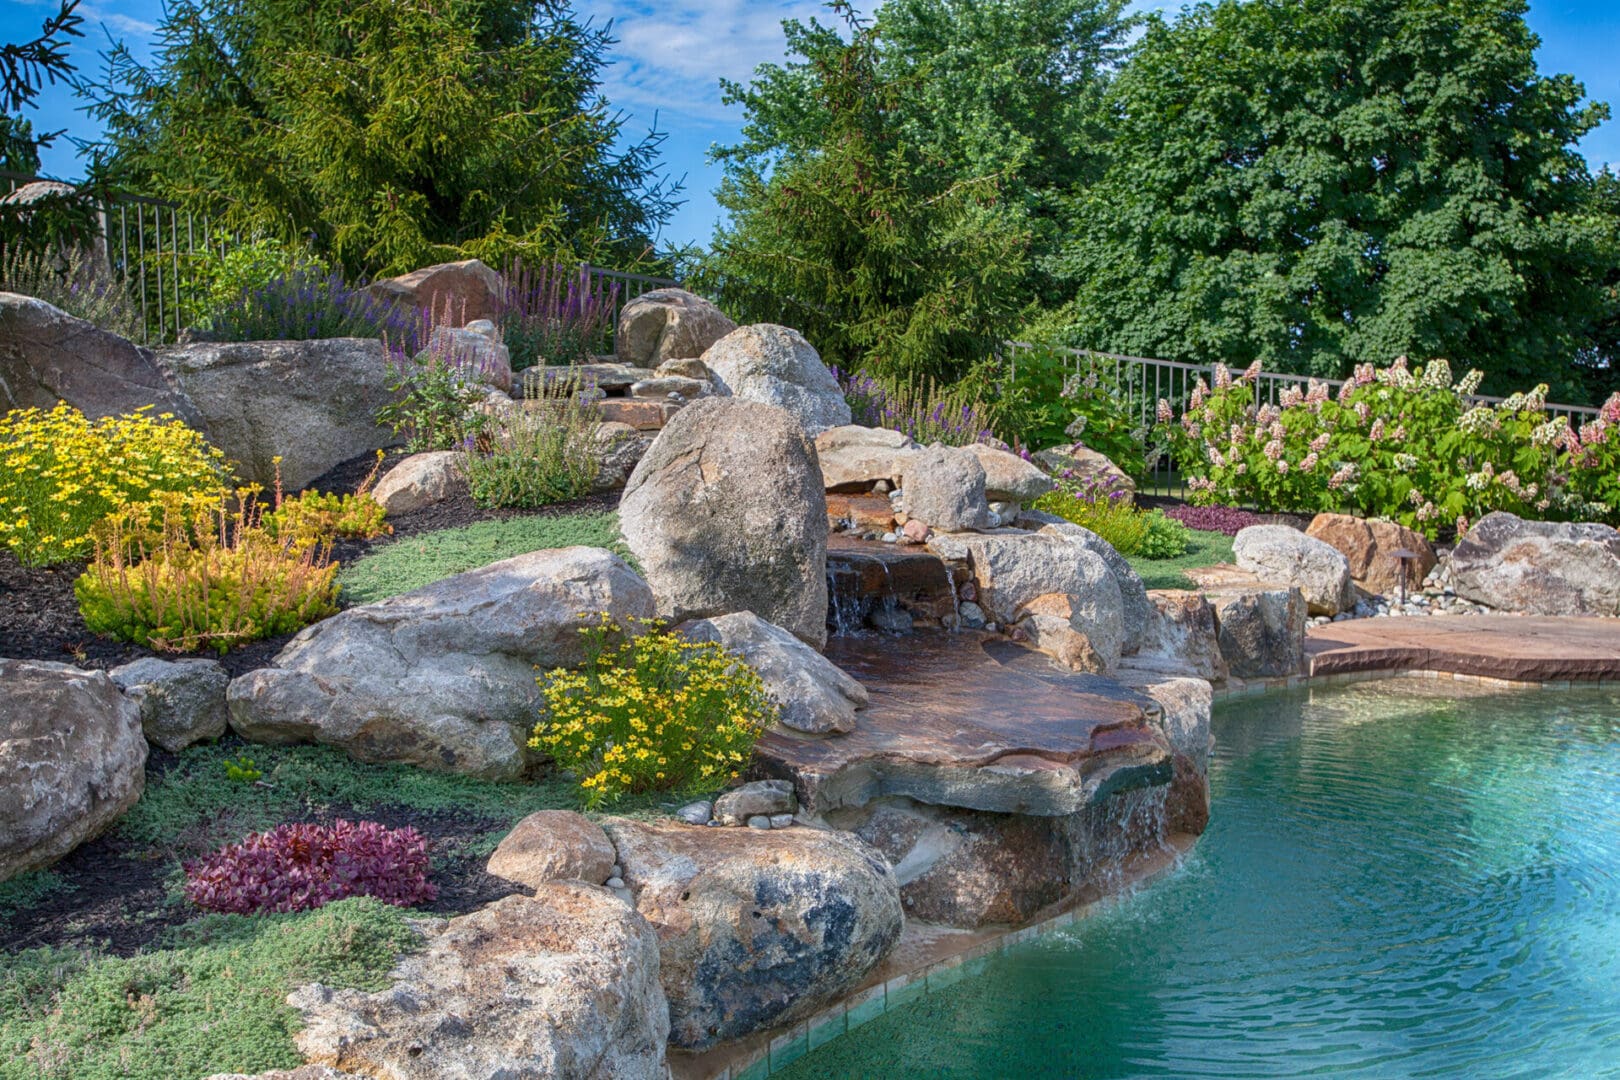 A swimming pool with water features such as rocks and a waterfall.